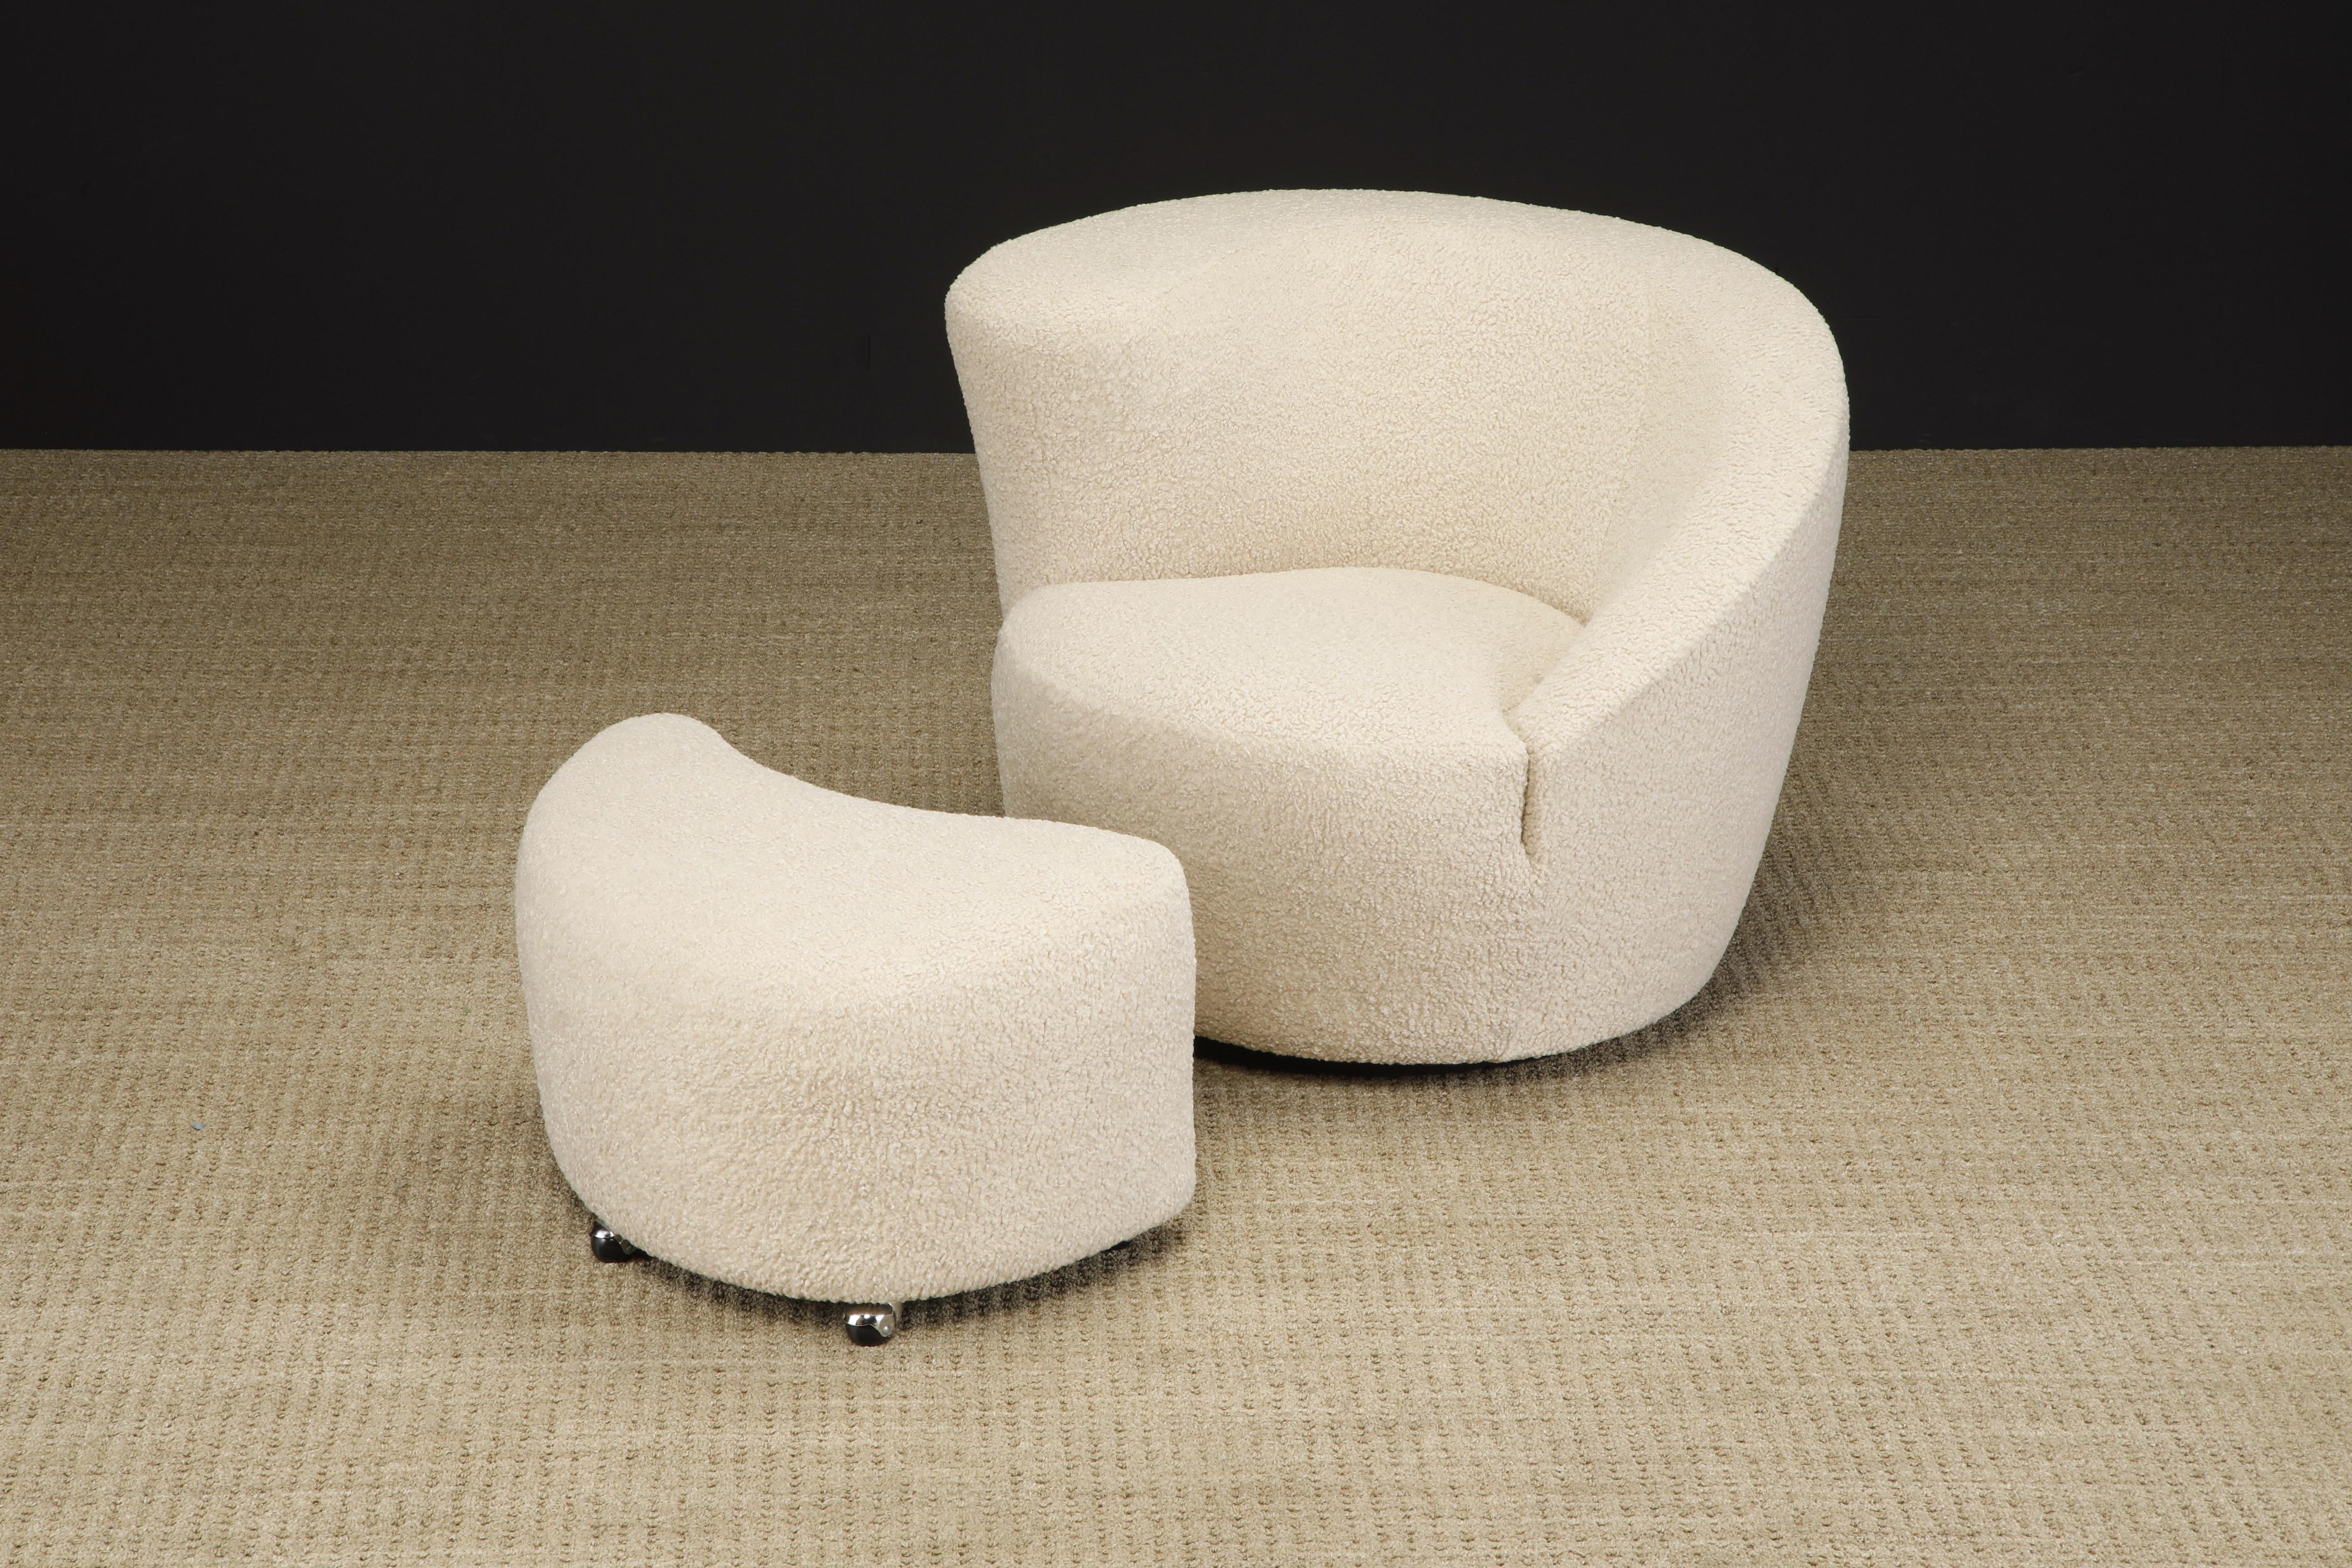 Post-Modern 'Corkscrew' Chair & Ottoman by Vladimir Kagan for Directional in Bouclé, Signed